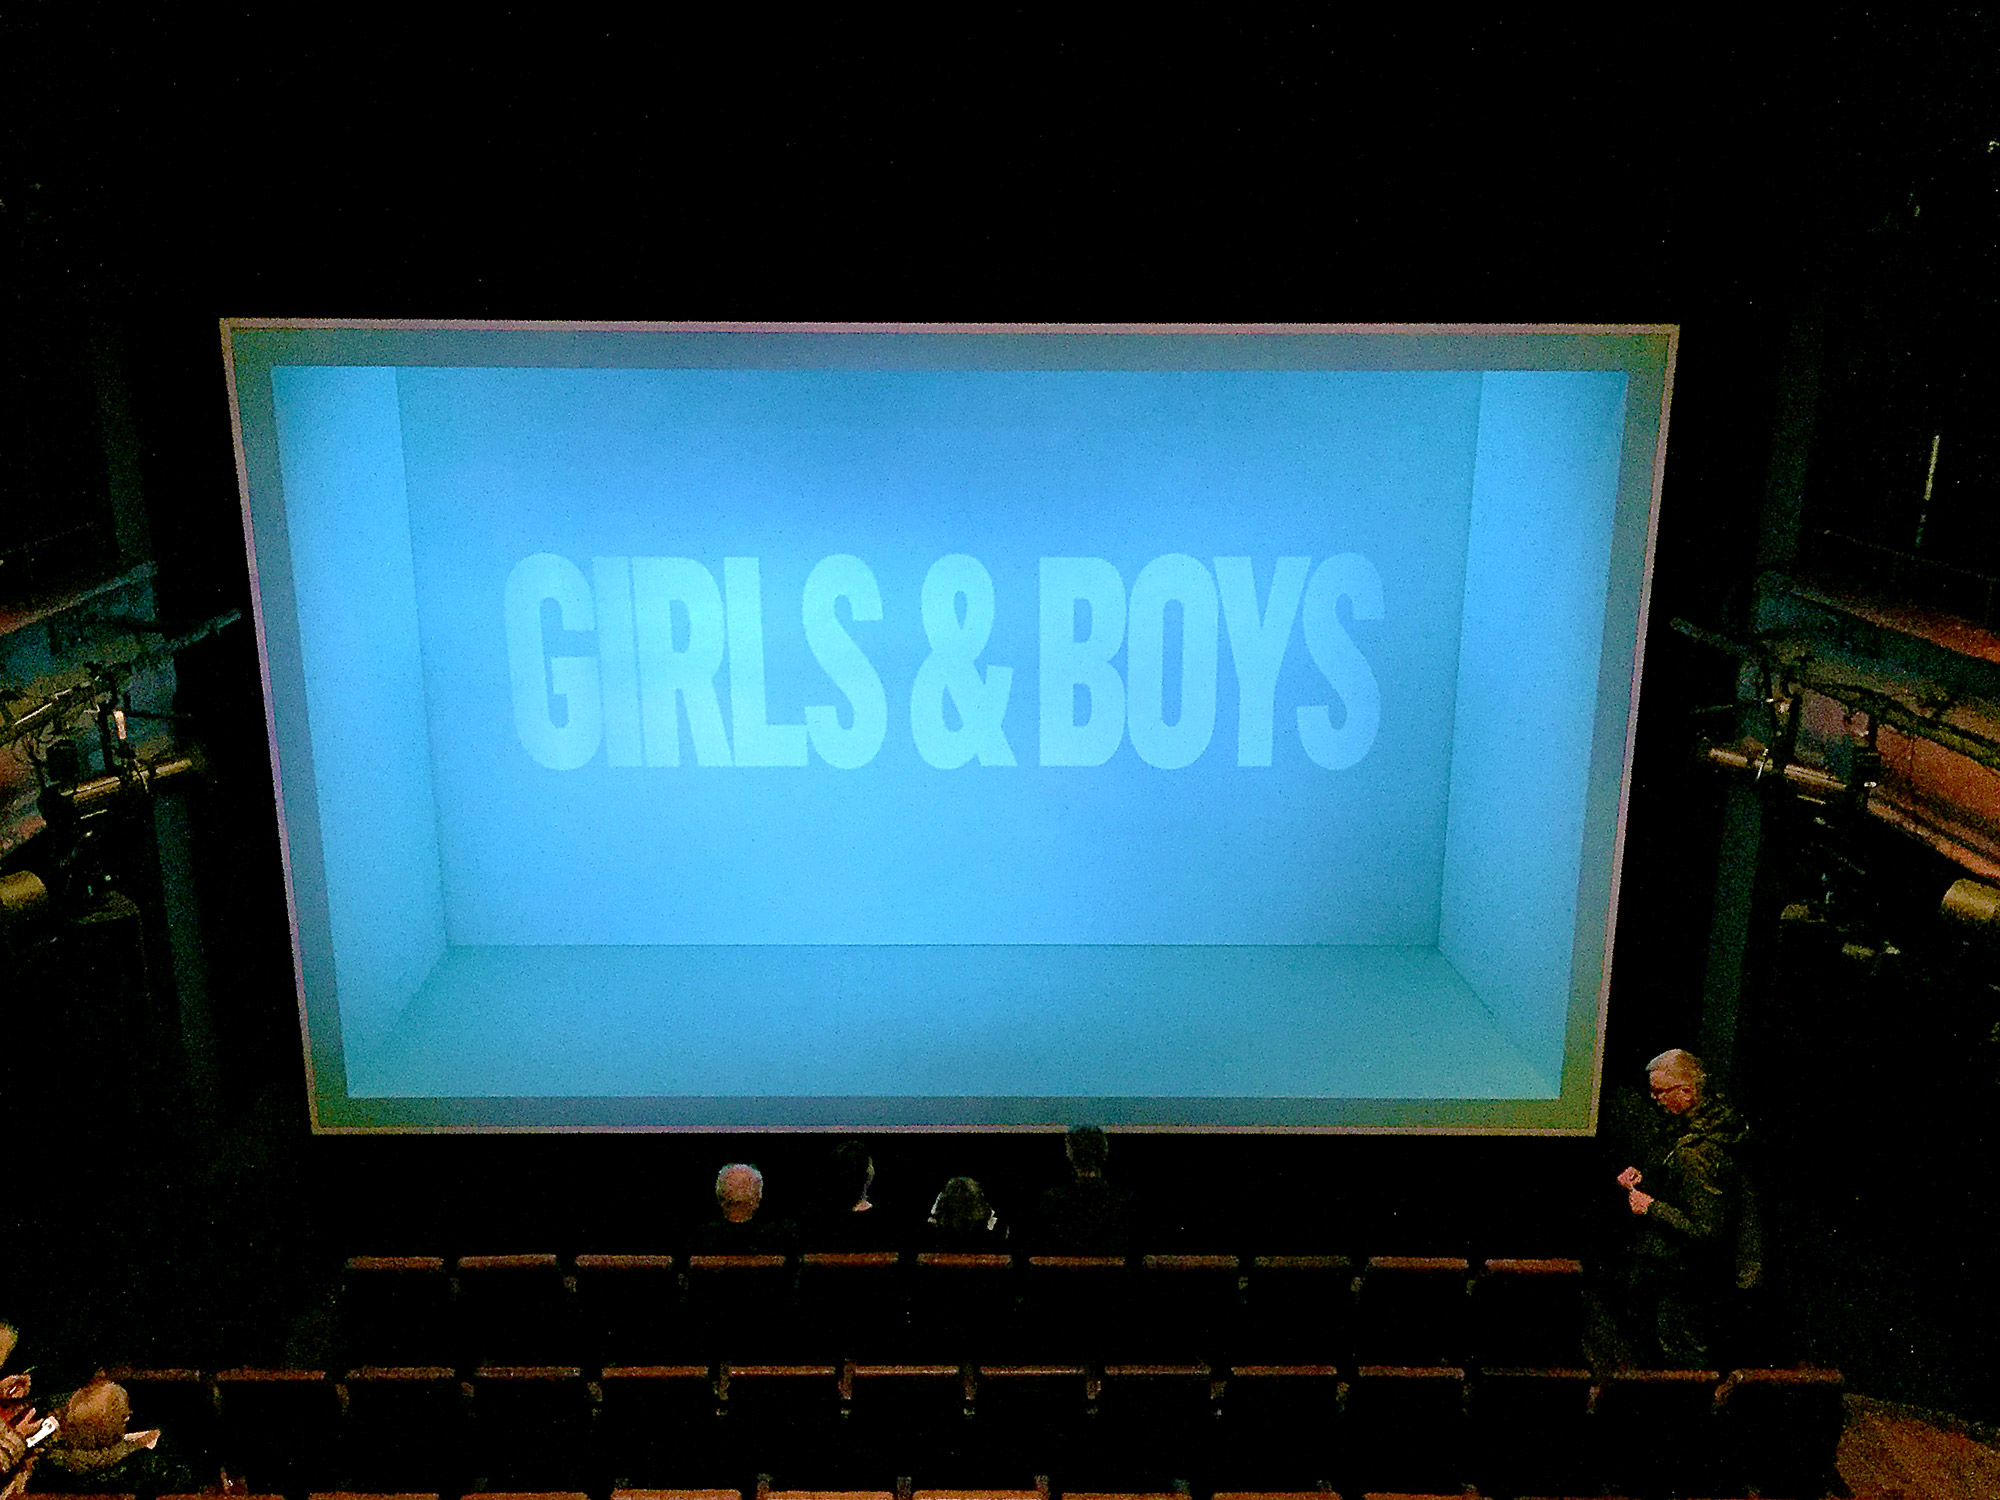 In front of rows of theatre seats, a green-lit box is open on one side towards us. At the rear of the box are the words Girls & Boys.